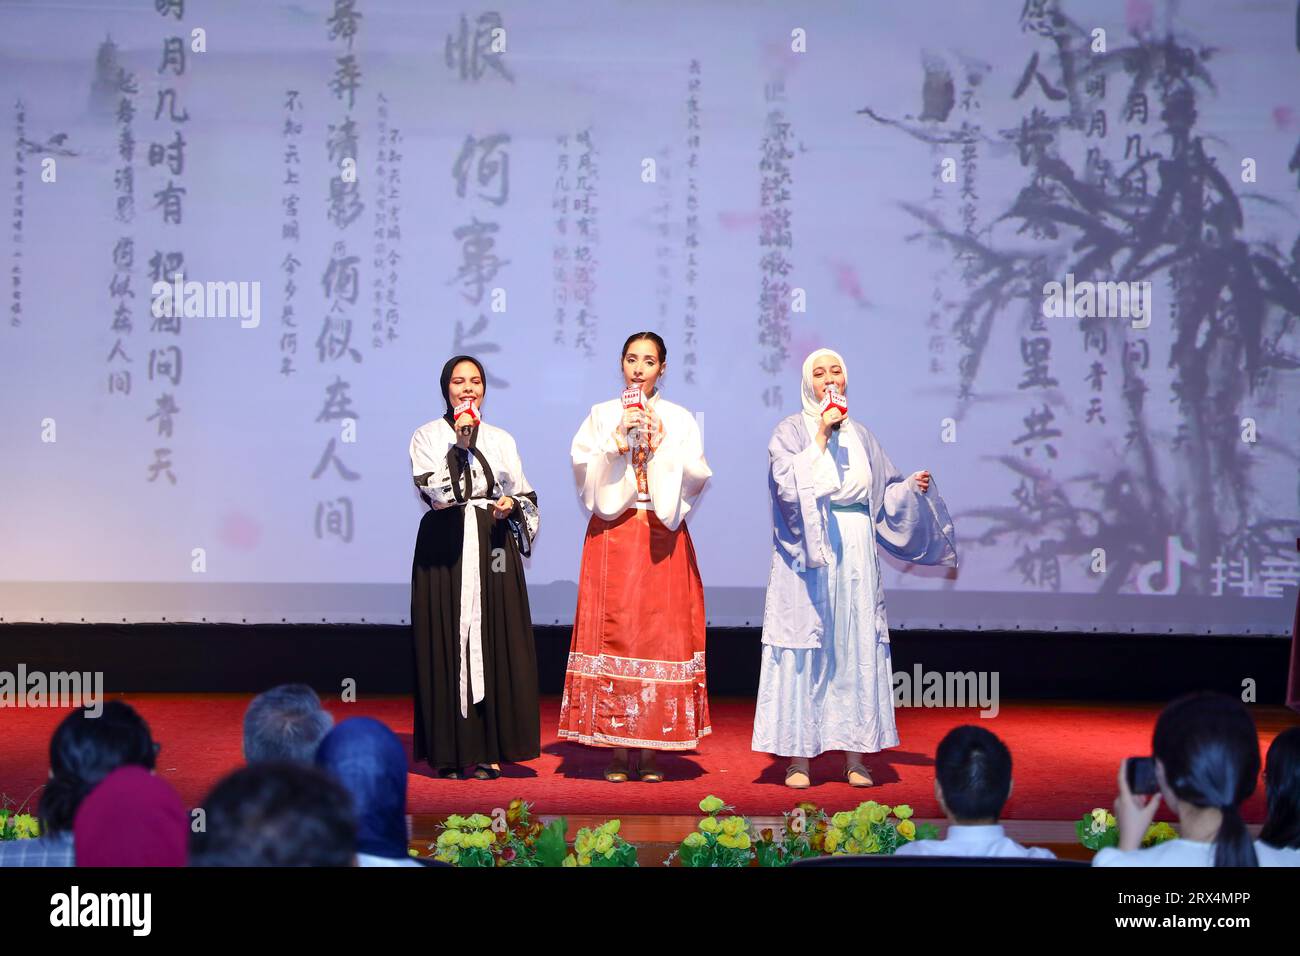 Cairo, Egypt. 21st Sep, 2023. Egyptian students stage a Chinese poetry performance during a ceremony to mark the mid-autumn festival in Cairo, Egypt, Sept. 21, 2023. The China Cultural Center in Cairo marked the upcoming Chinese mid-autumn festival with music and poetry recitations performances on Thursday evening. Credit: Ahmed Gomaa/Xinhua/Alamy Live News Stock Photo